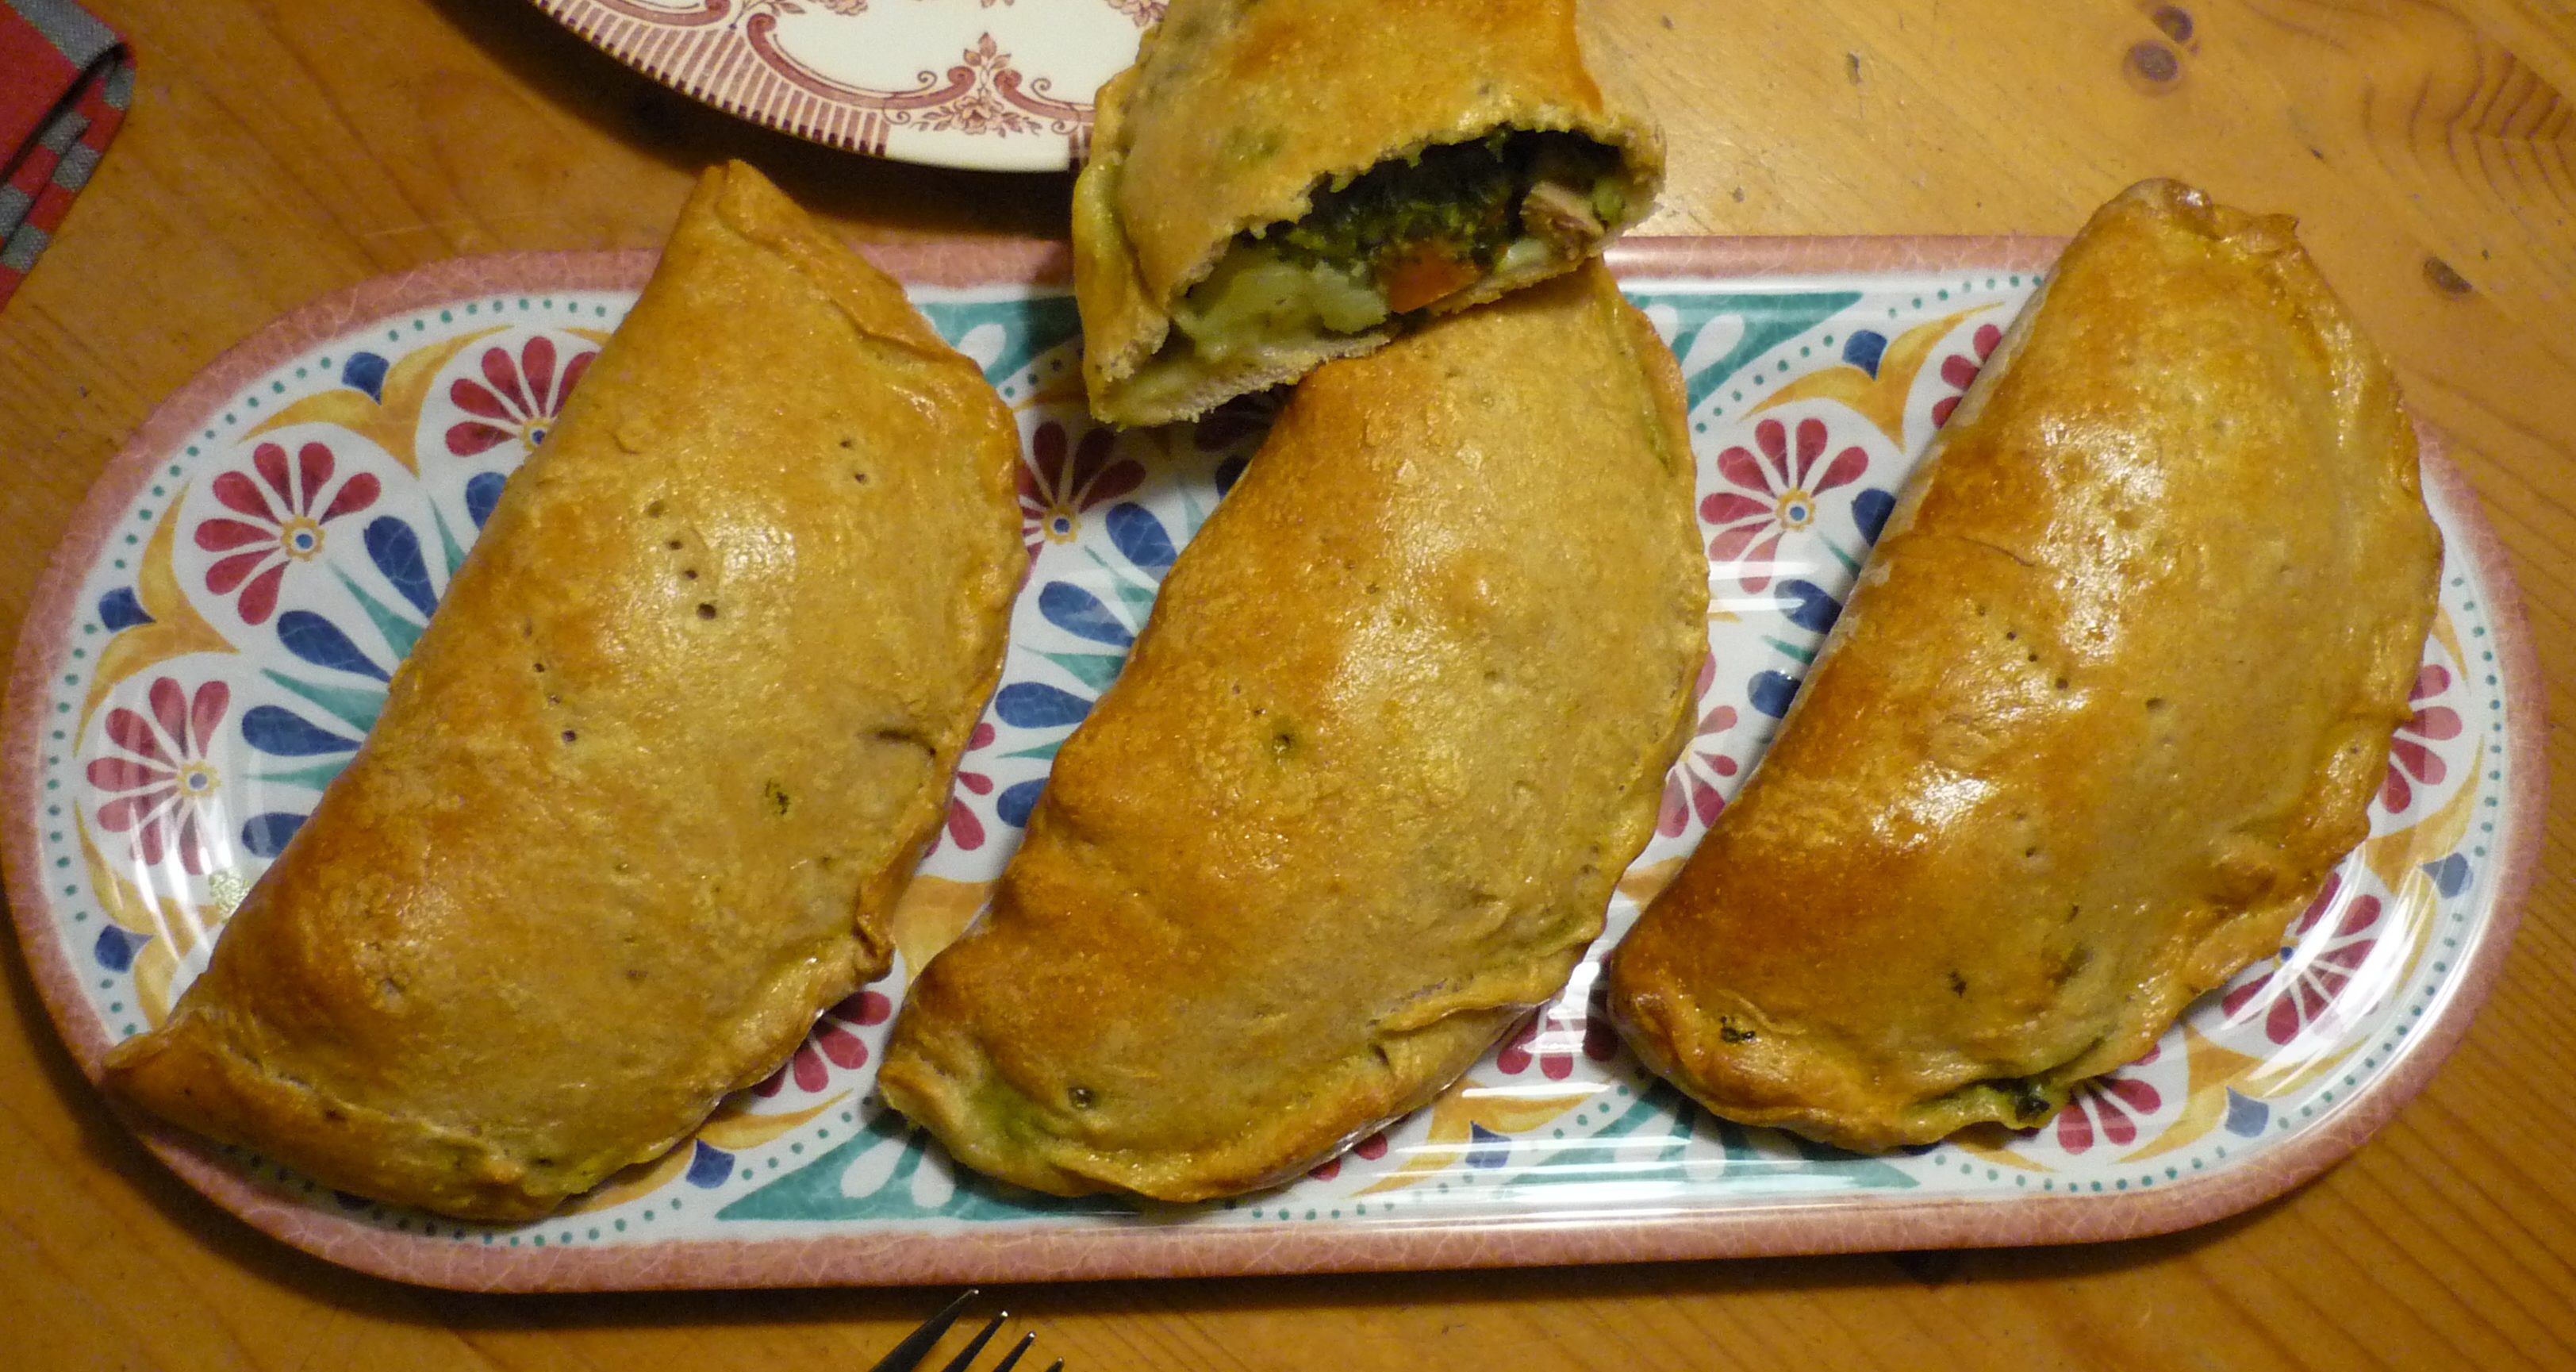 Meat pies with leftover kale, potato, sausage stir-fry filling